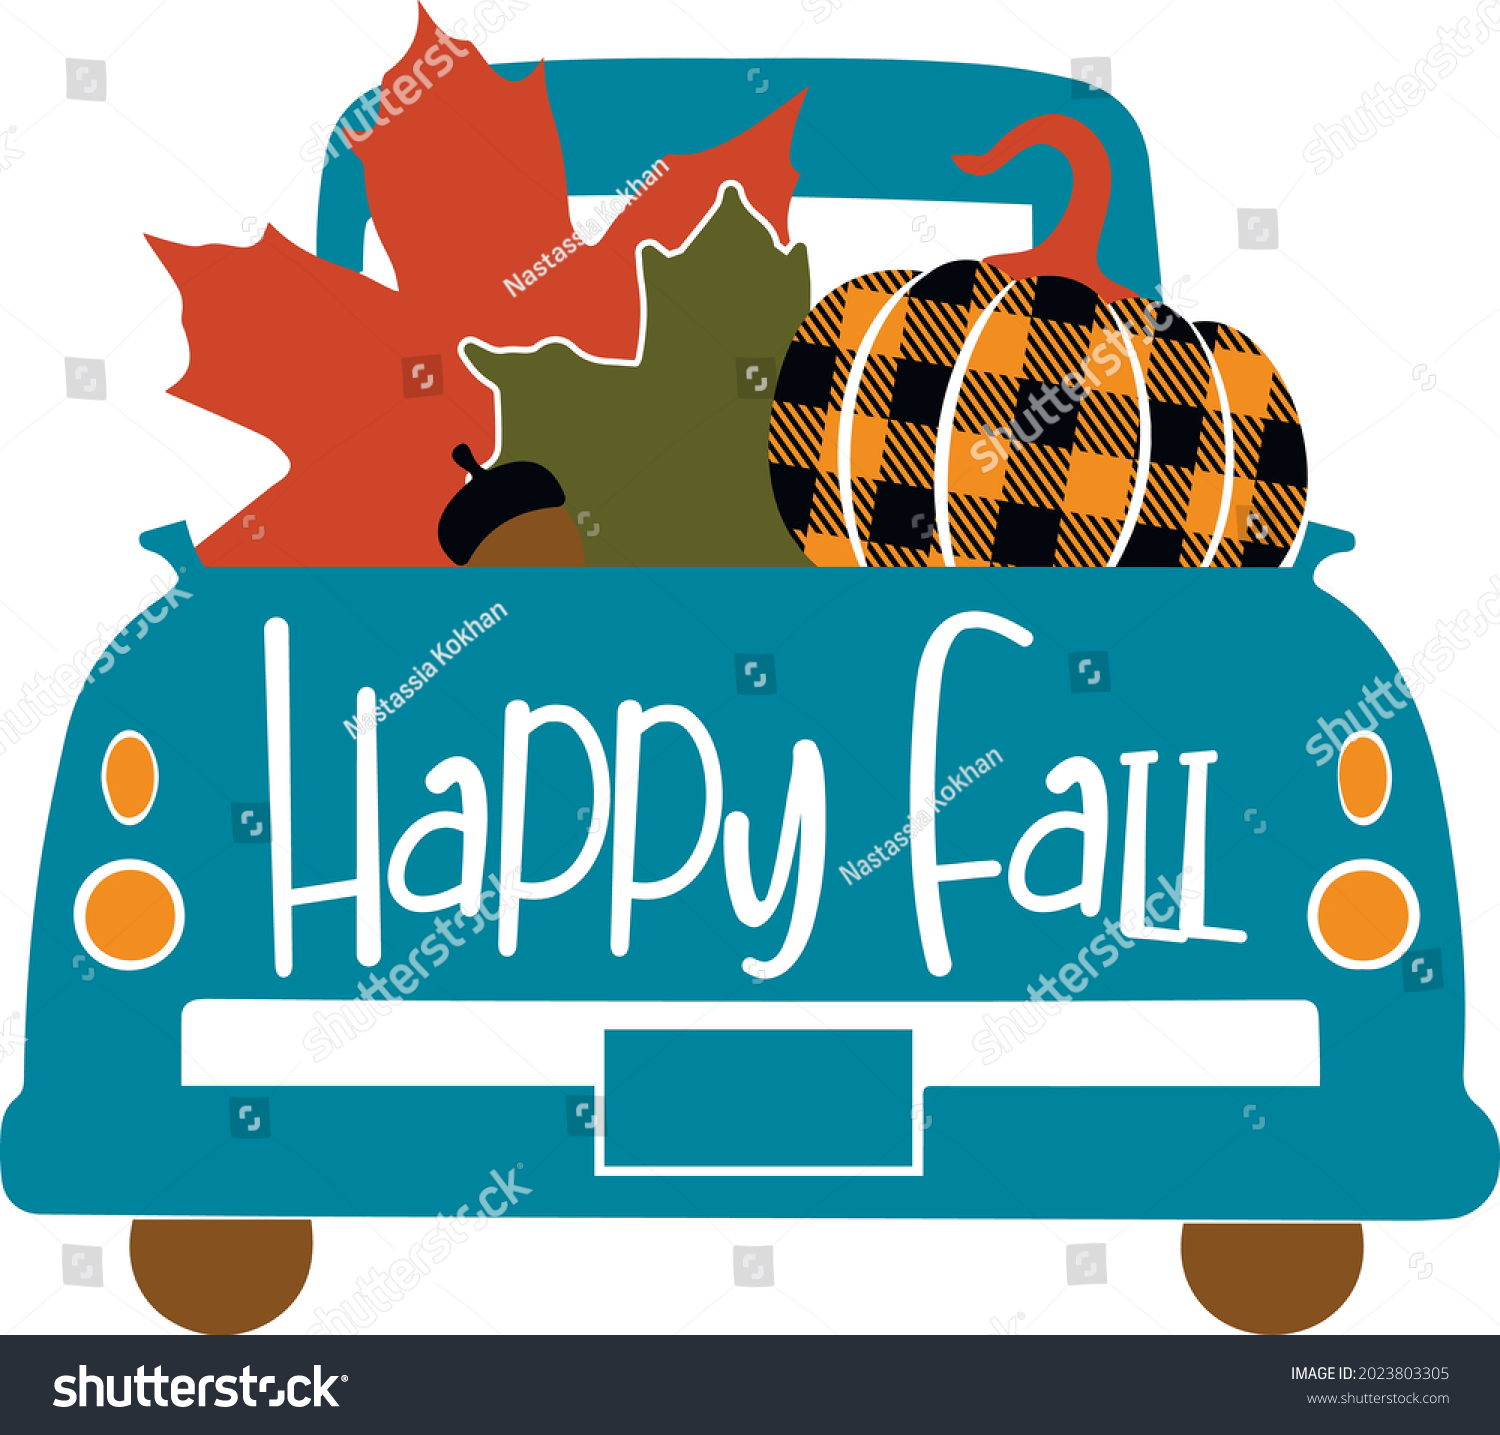 SVG of Fall truck with pumpkin svg vector Illustration isolated on white background.Happy fall truck shirt design. Pumpkin truck for autumn shirt design. Fall sublimation. Hello autumn truck with leaves svg